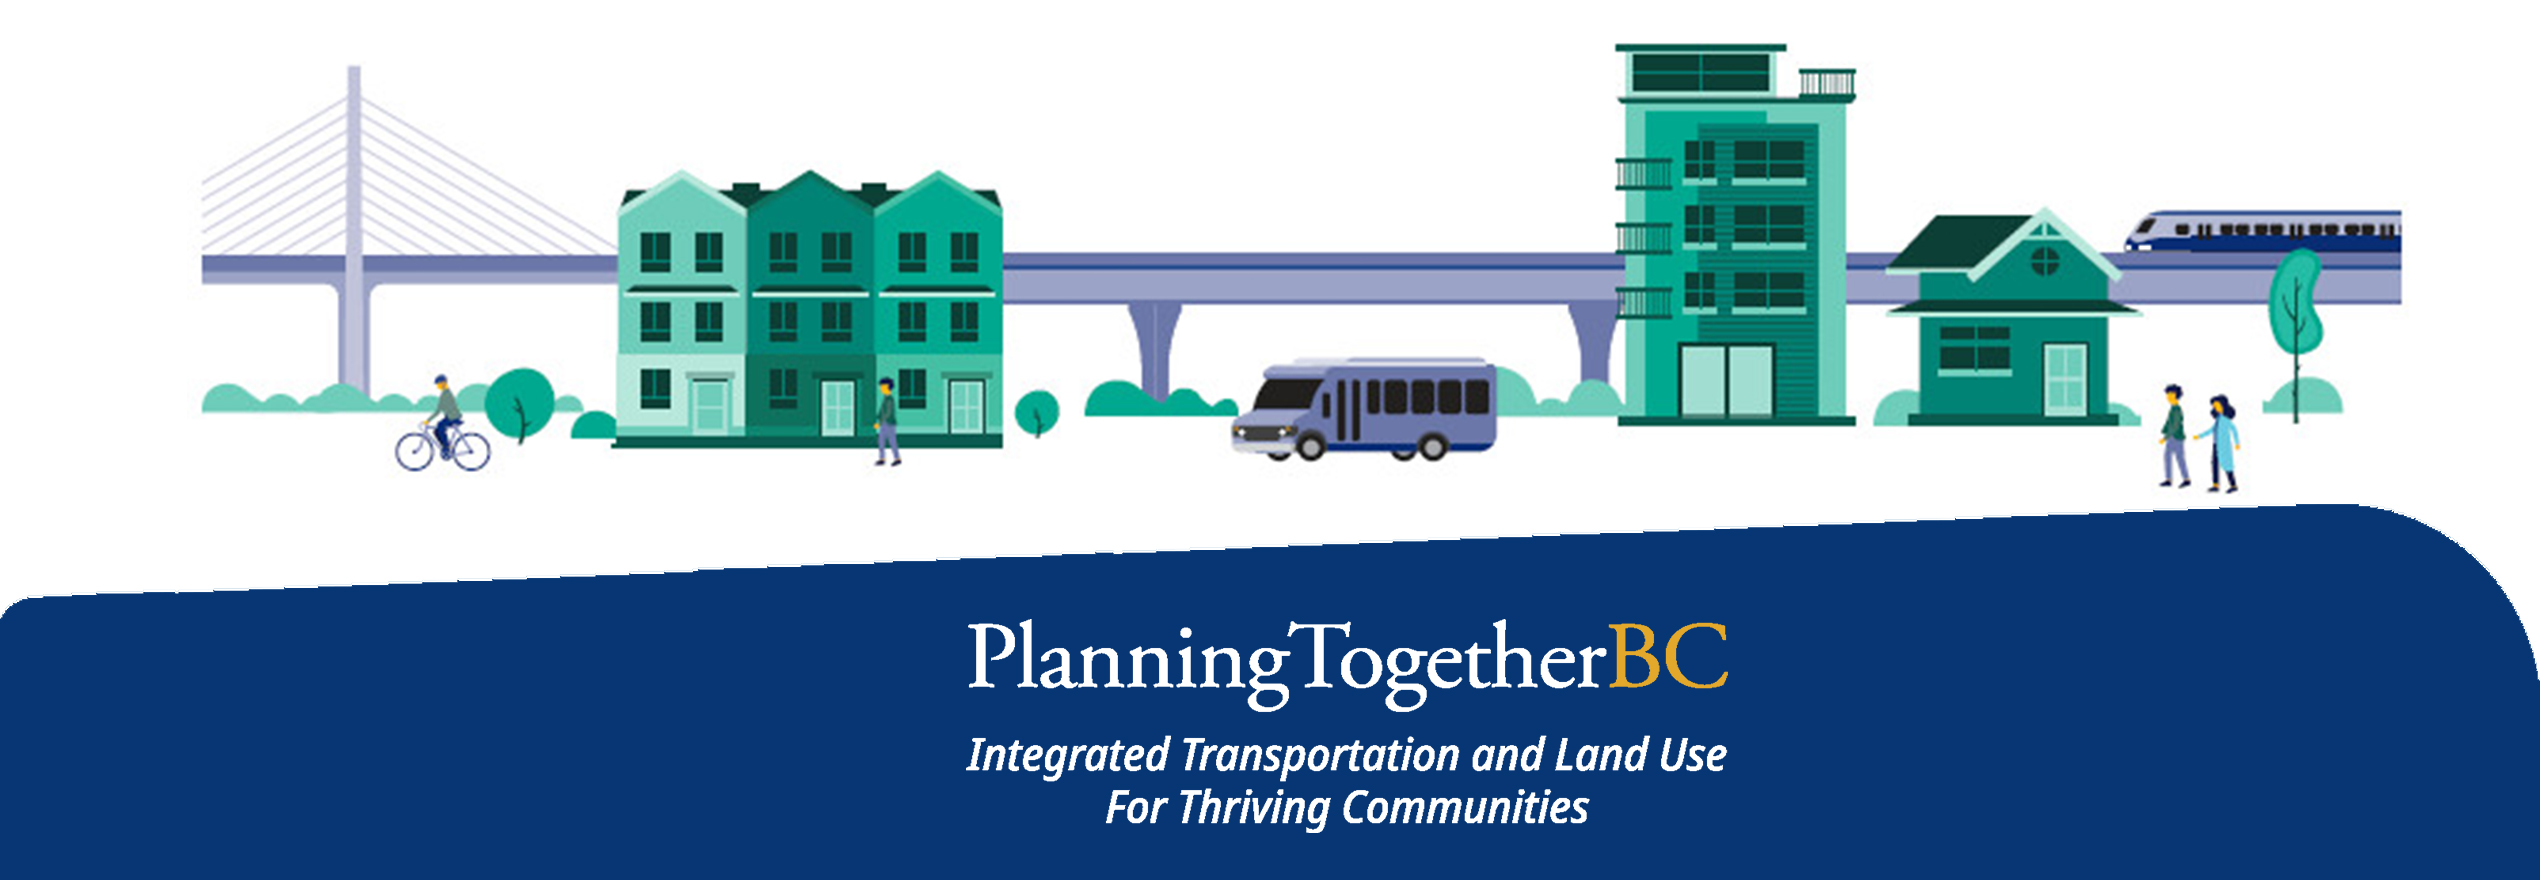 PlanningTogetherBC with image of different forms of transportation and buildings